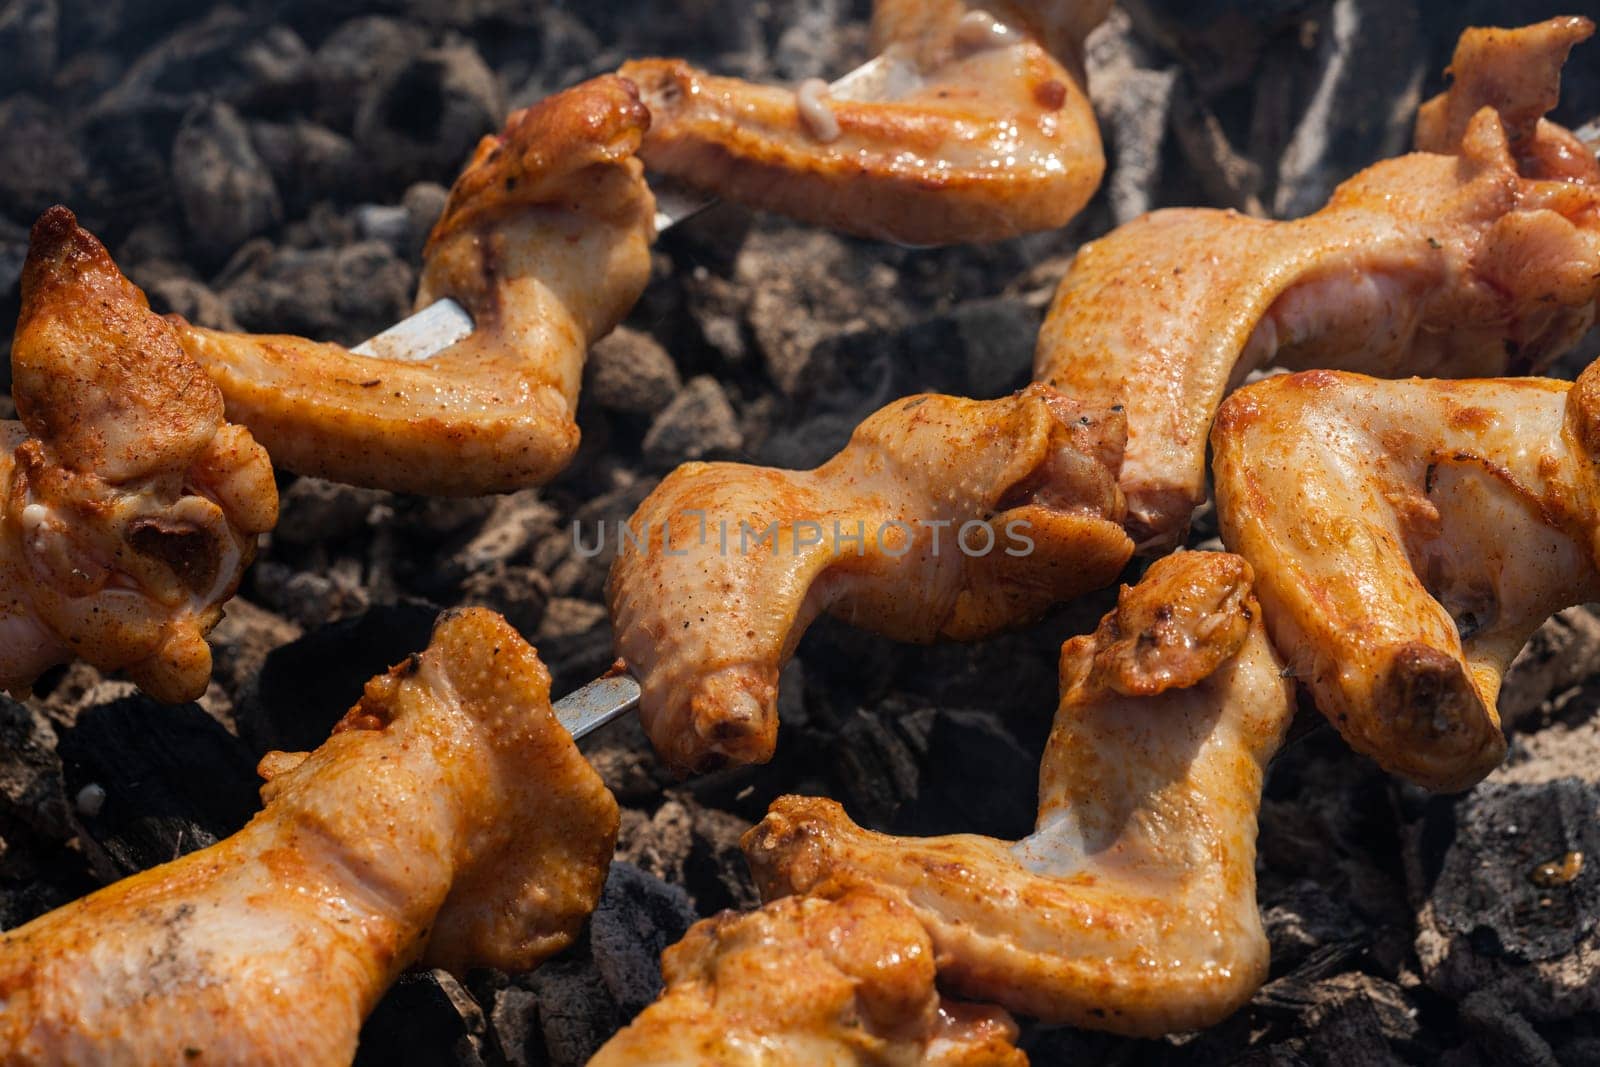 Juicy chicken barbecue on outdoors metal skewers on charcoal grill with fire smoke by Alexander-Piragis